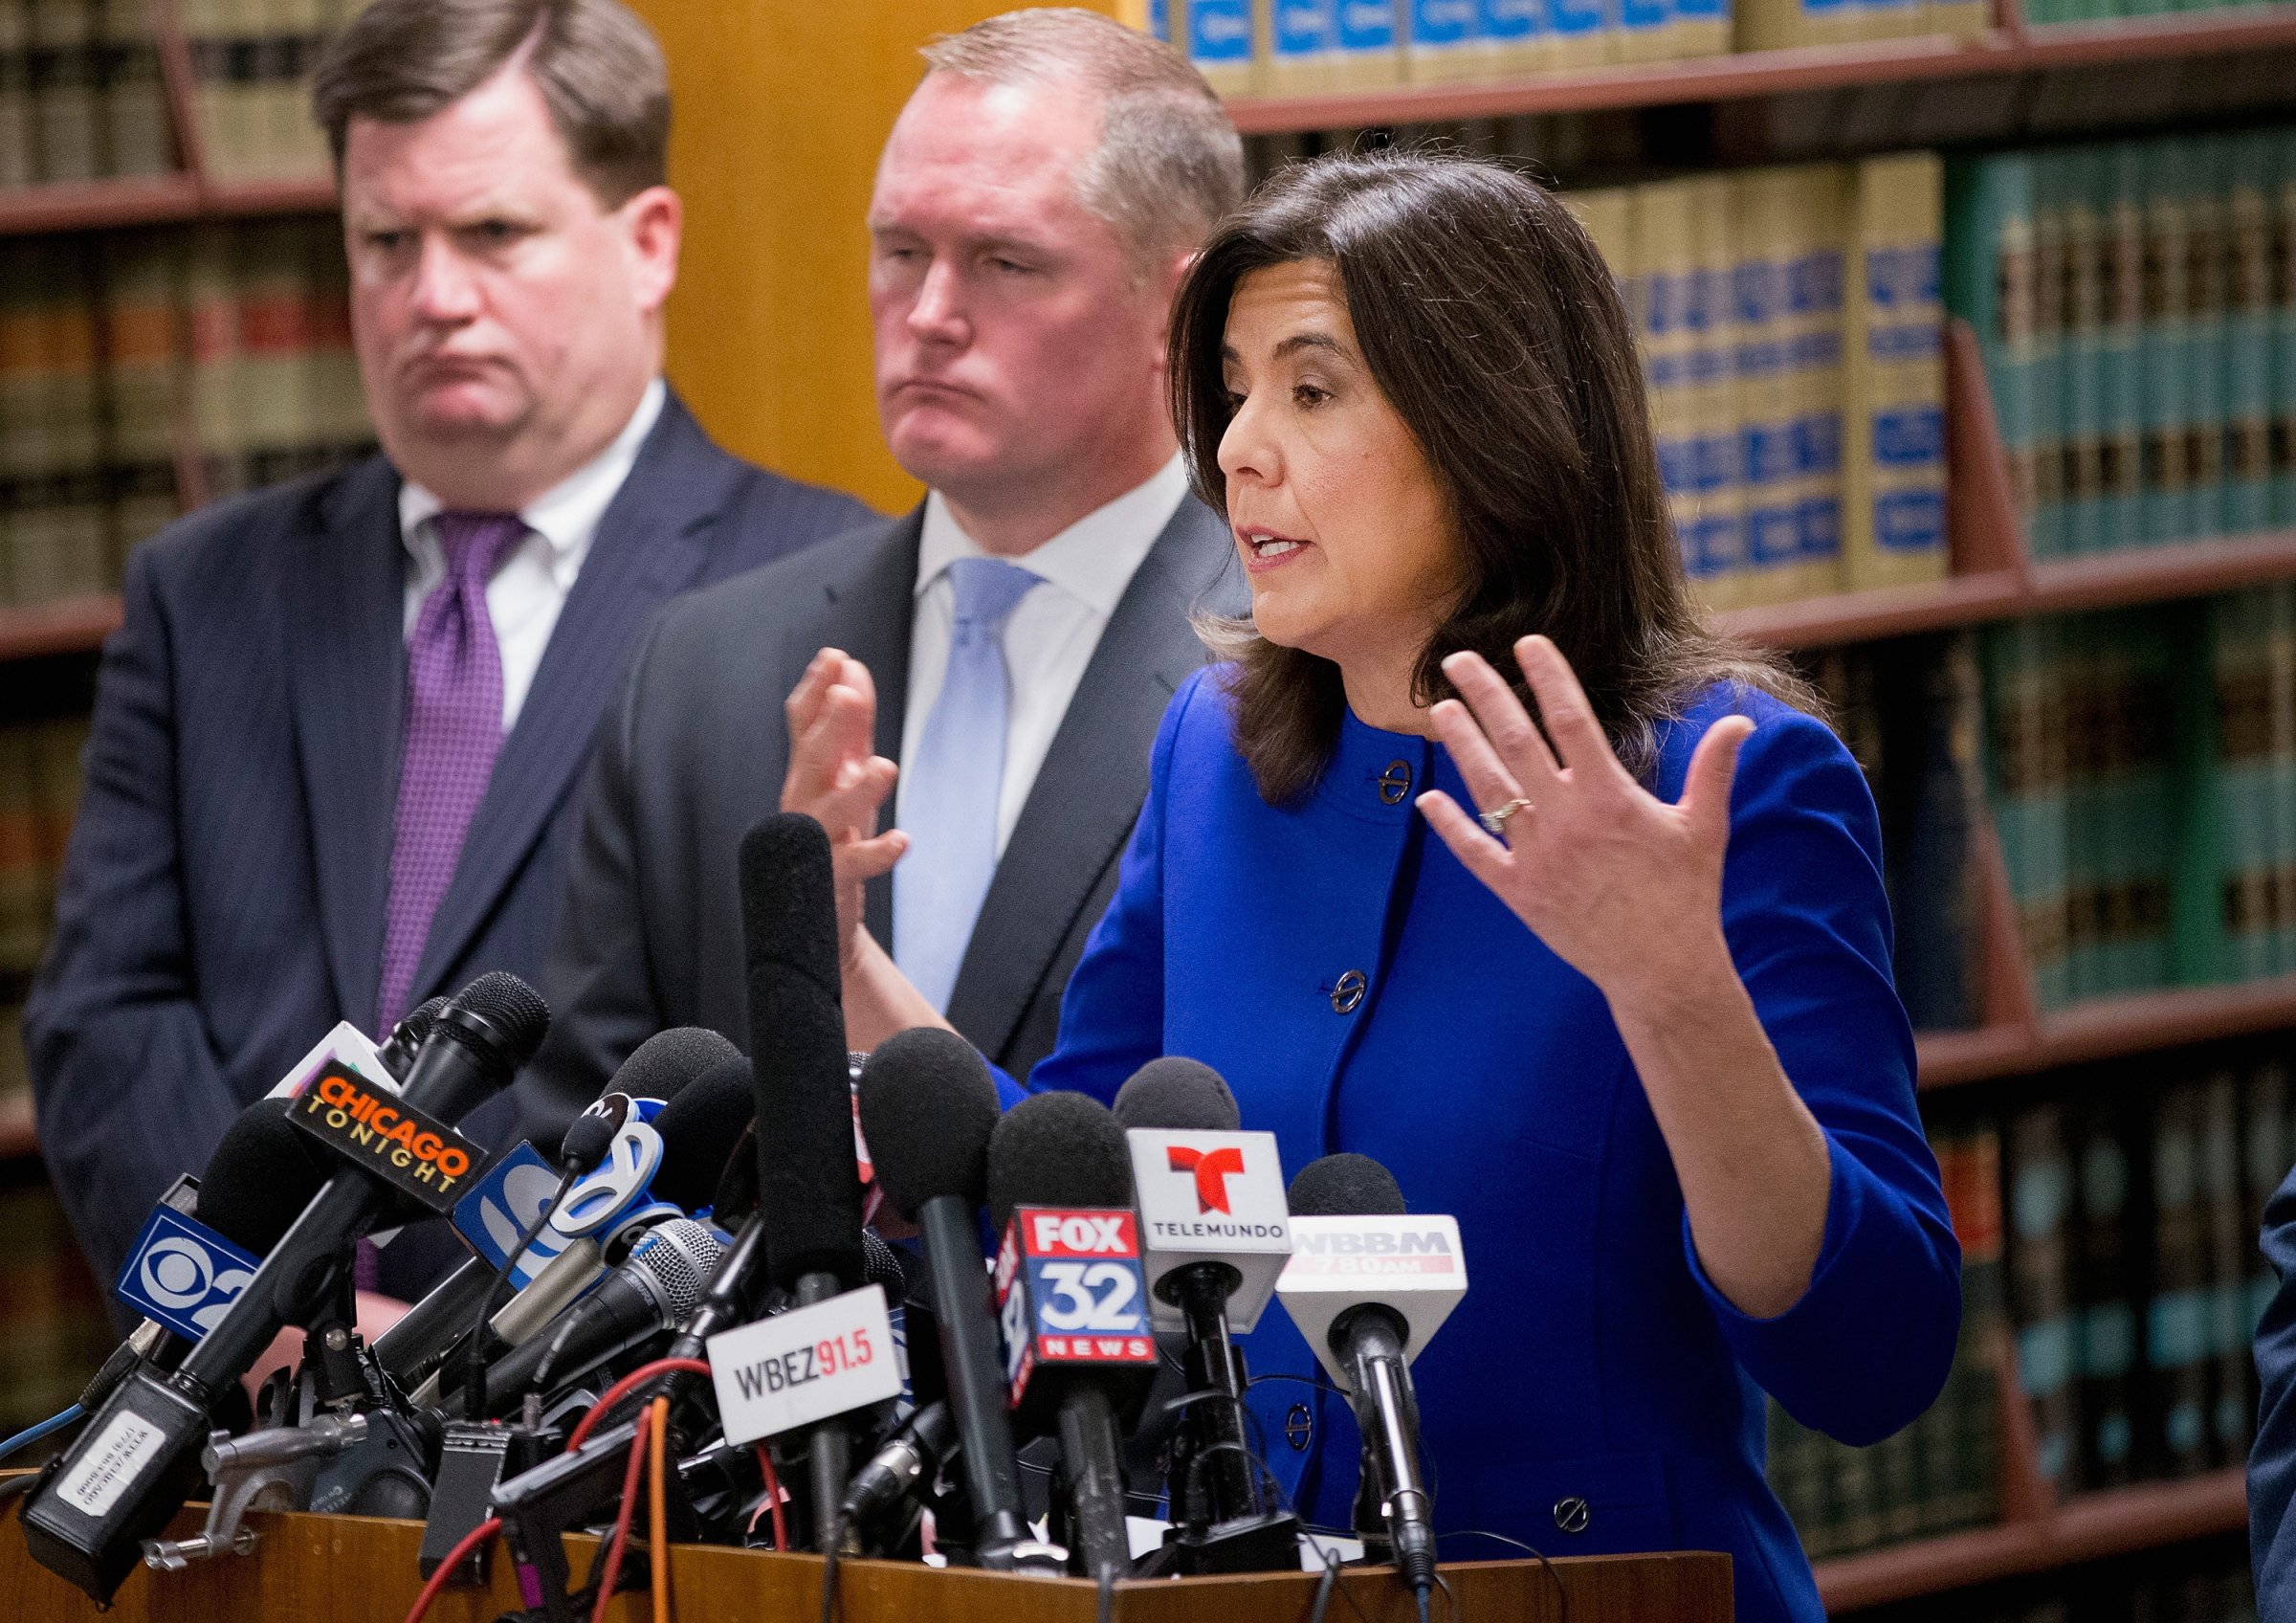 Cook County State's Attorney Anita Alvarez speaks to the media about Chicago Police officer Jason Van Dyke following a bond hearing for Van Dyke at the Leighton Criminal Courts Building in Chicago on Nov. 24, 2015.